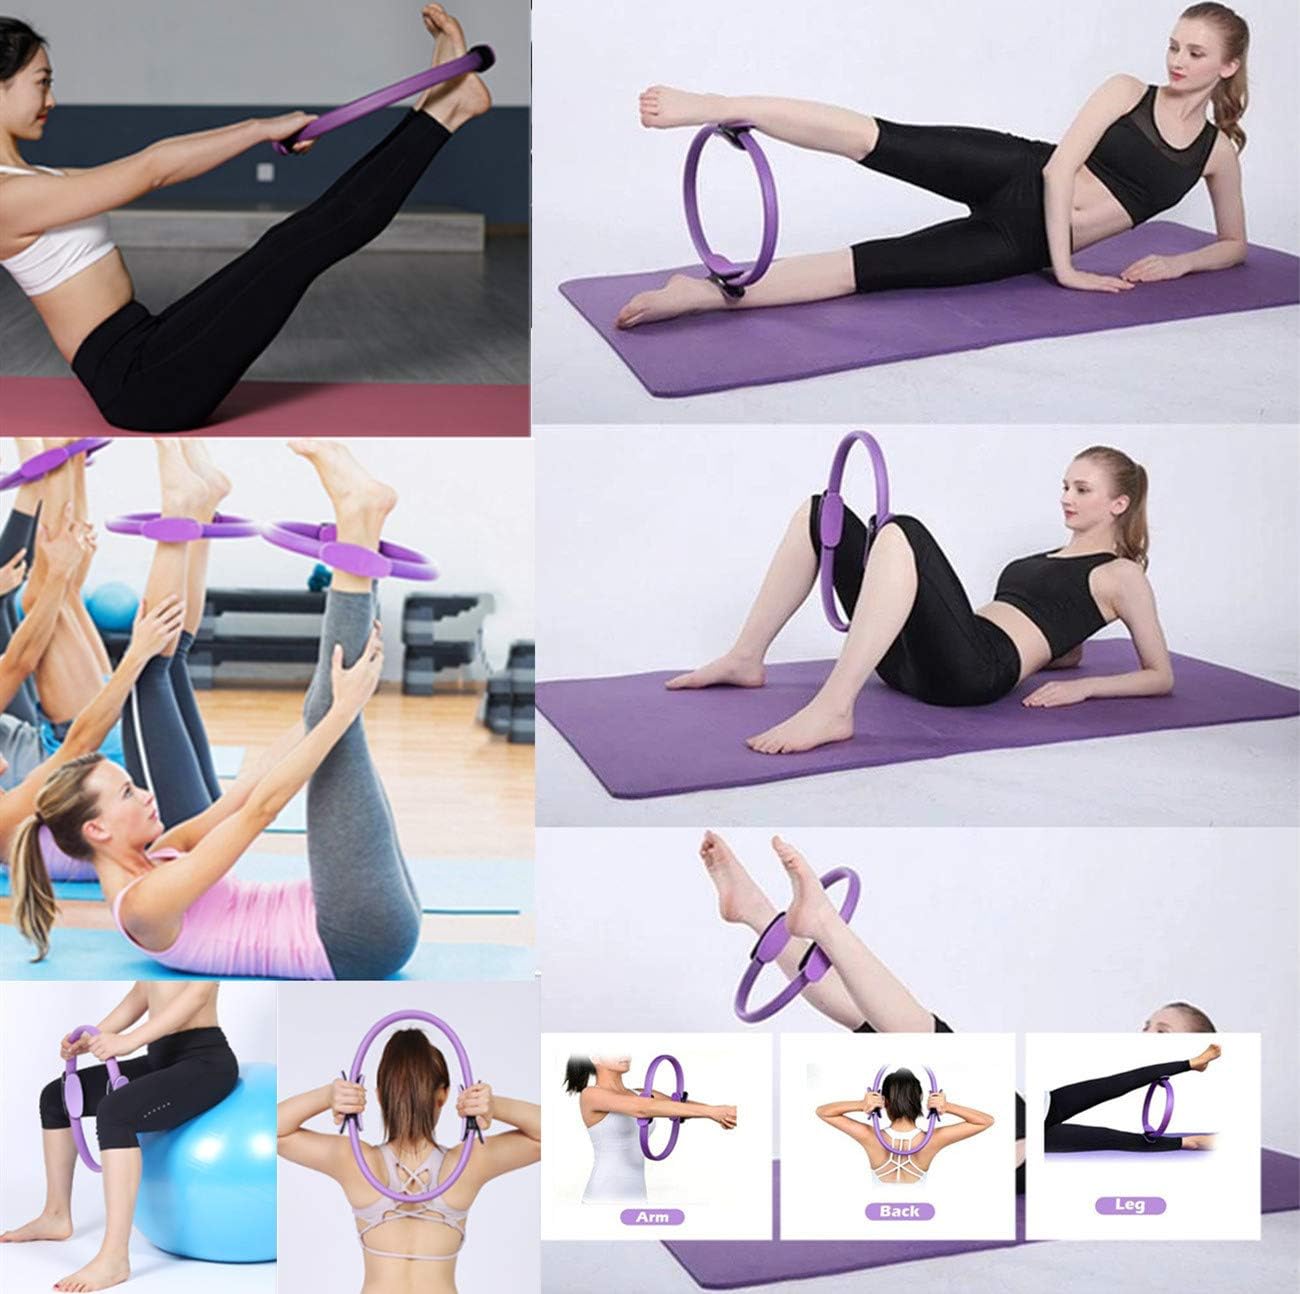 YXILEE 6Pcs Pilates Ring Set for Men - Home Exercise Gym Equipment Women Yoga Circle Ball Stretching Strap Loop Band Non Slip Socks Exercise - Equipment for Home Workout